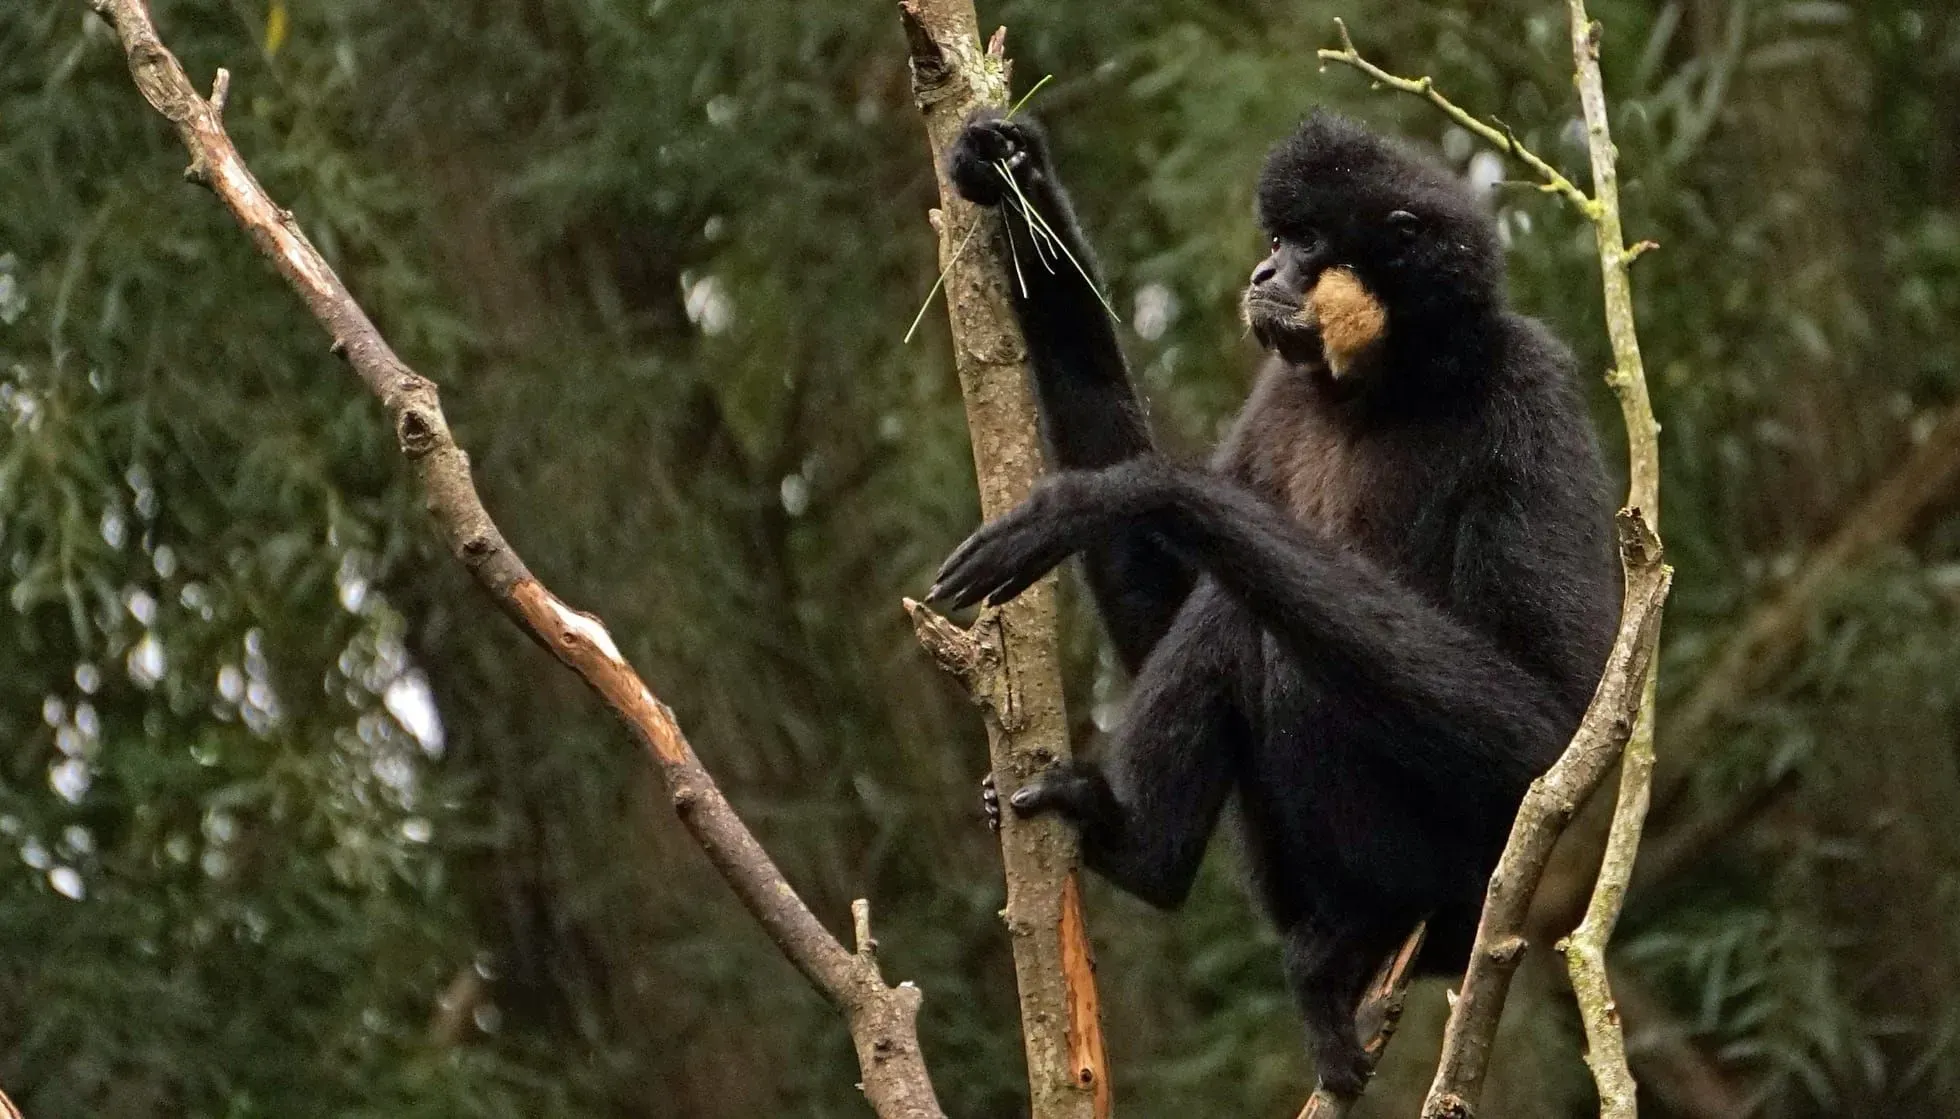 Male Yellow-cheeked Gibbon sitting on a tree